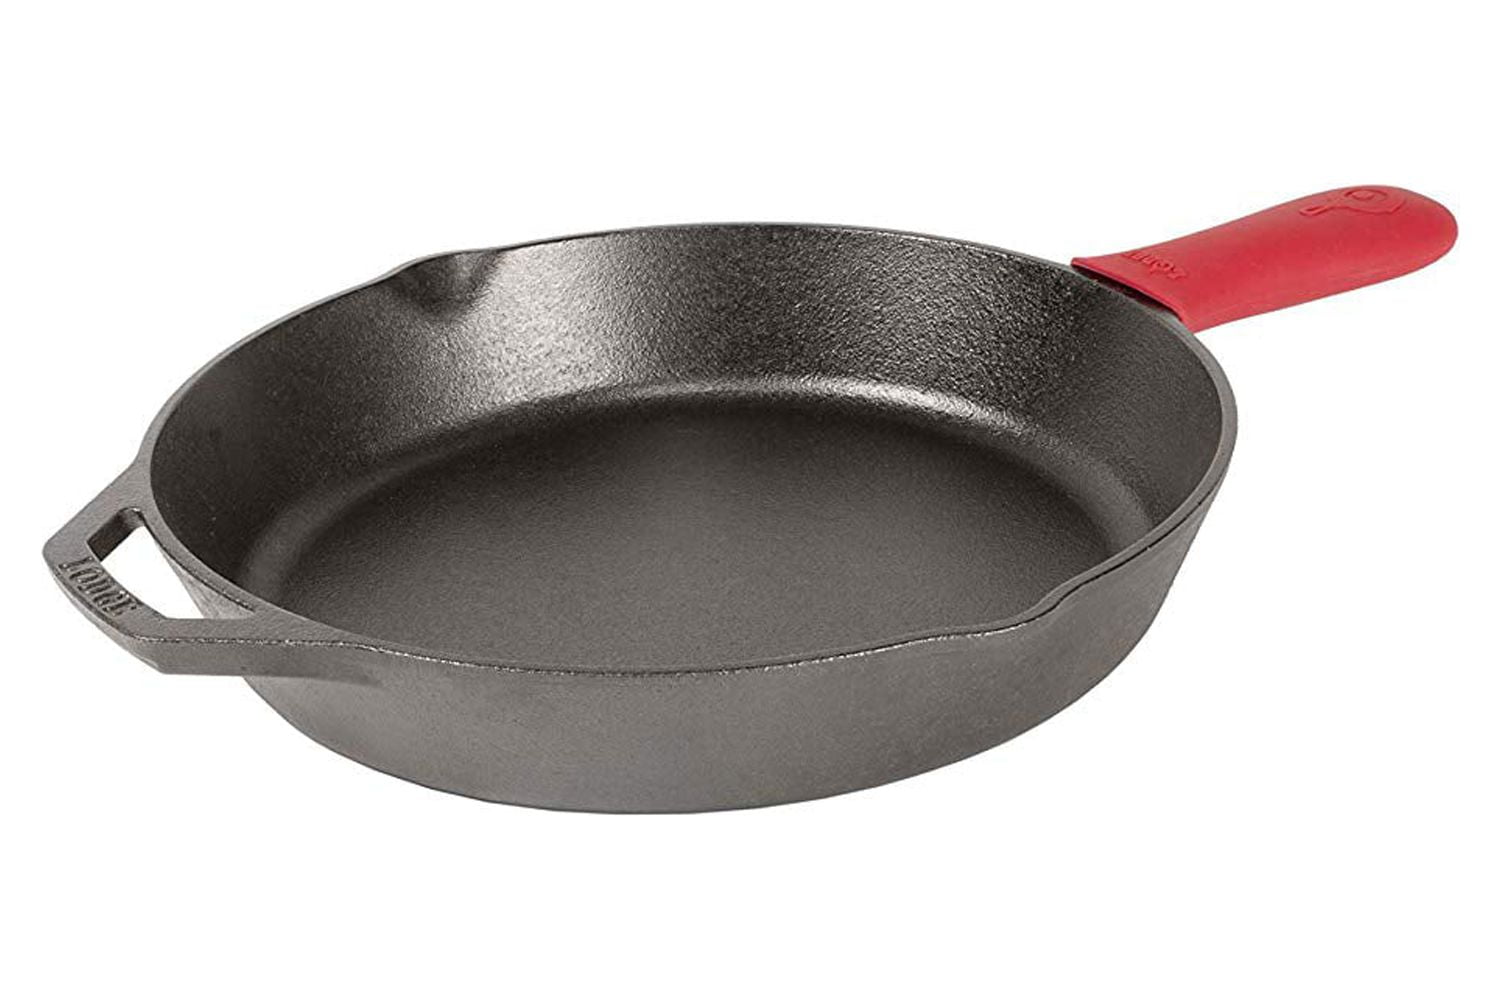 FBA_C12612 Cuisinel Cast Iron Skillet - 12-Inch Frying Pan with Assist  Handle + Red Silicone Grip Cover - Pre-Seasoned Oven Safe Cookware 